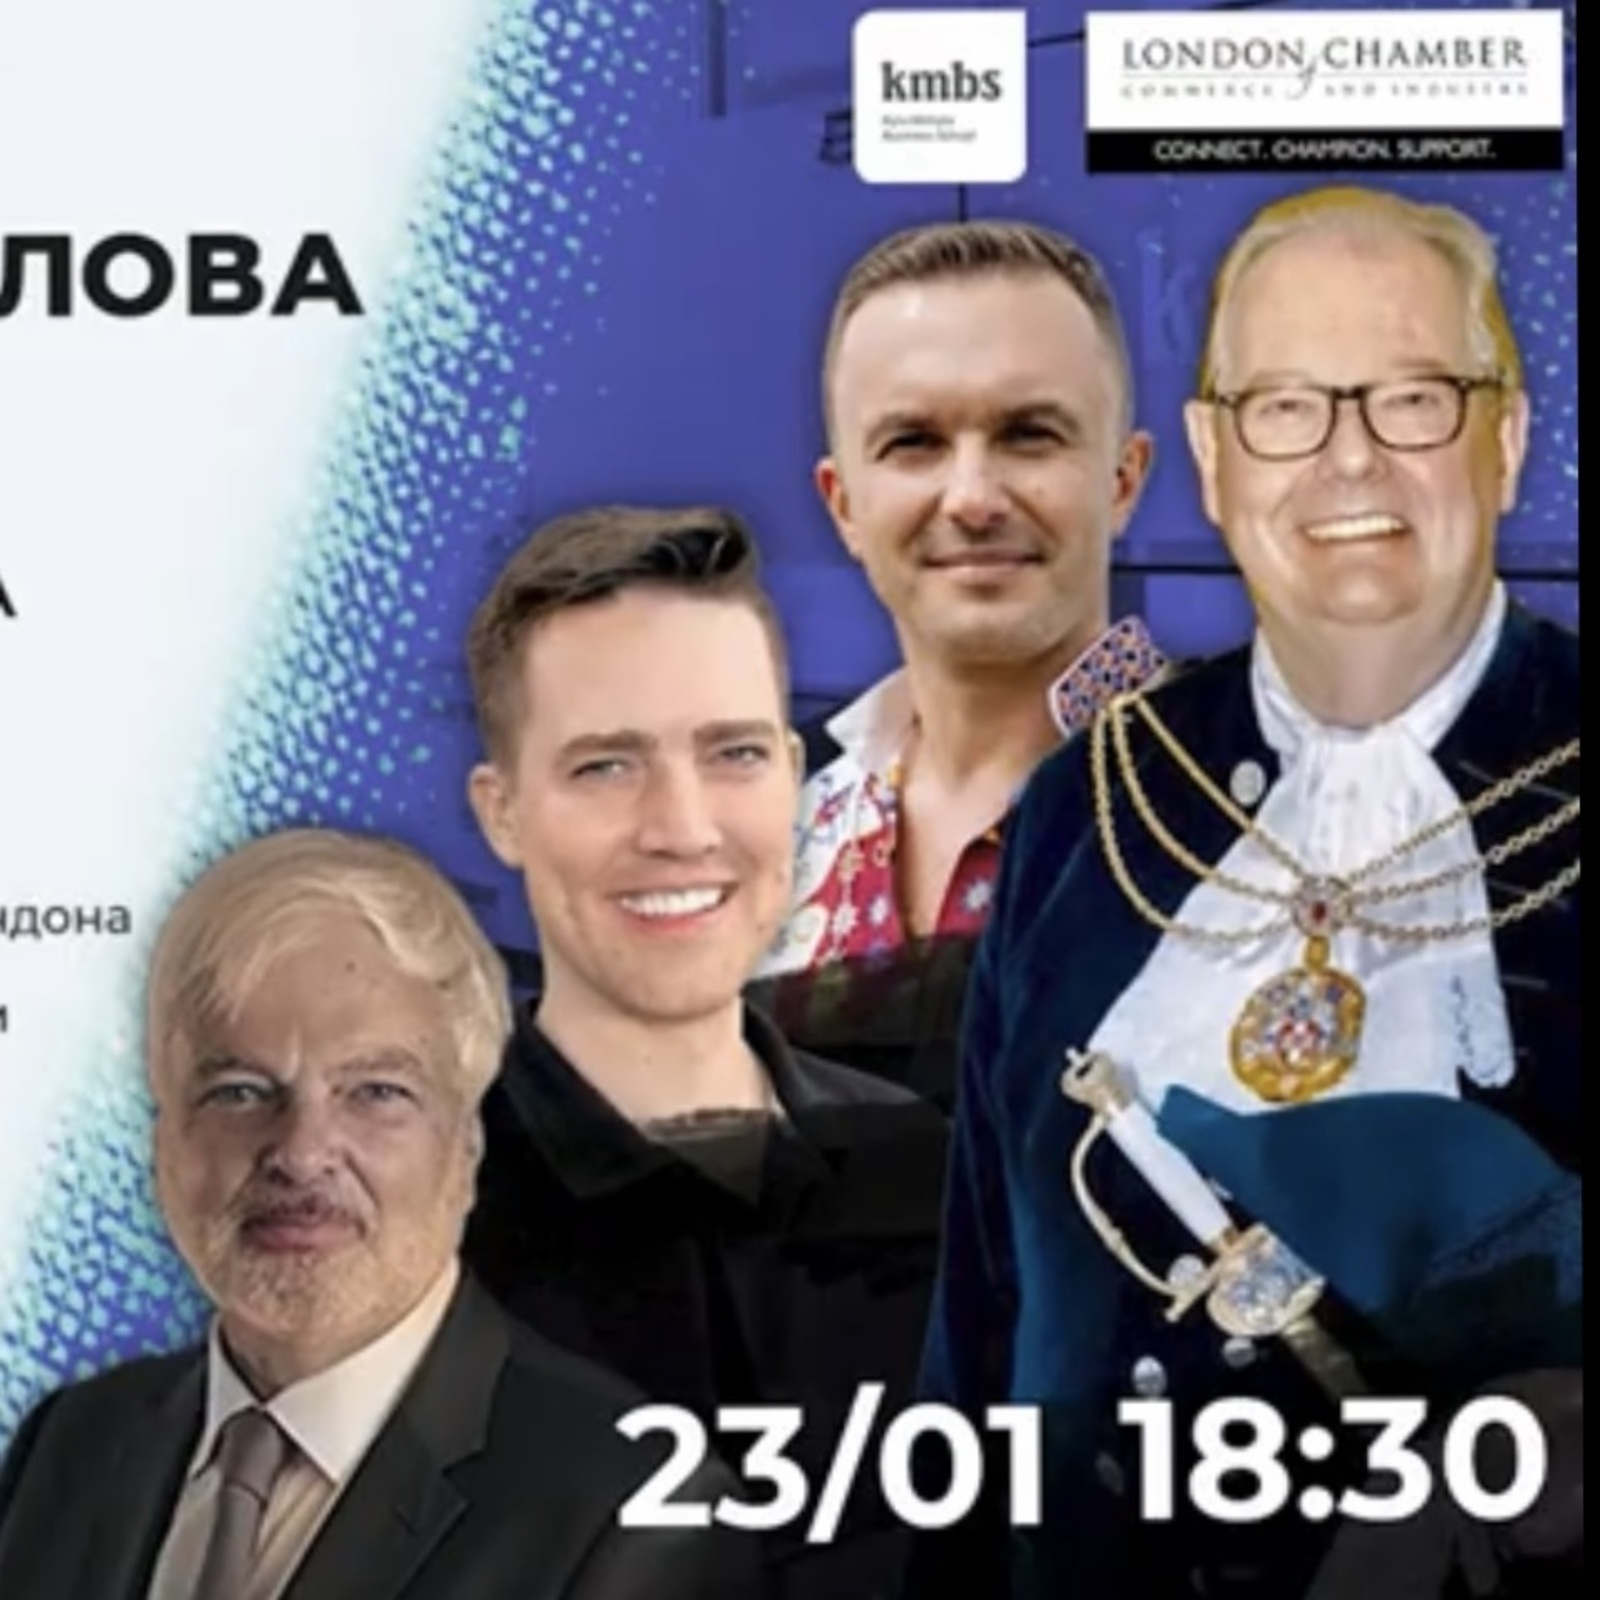 Fame at last! Our Ukranian panel discussion is on YouTube… https://drive.google.com/file/d/1TLDnIa38vJDms2nlasHNGxcGJ0MPsm2q/view?usp=sharing